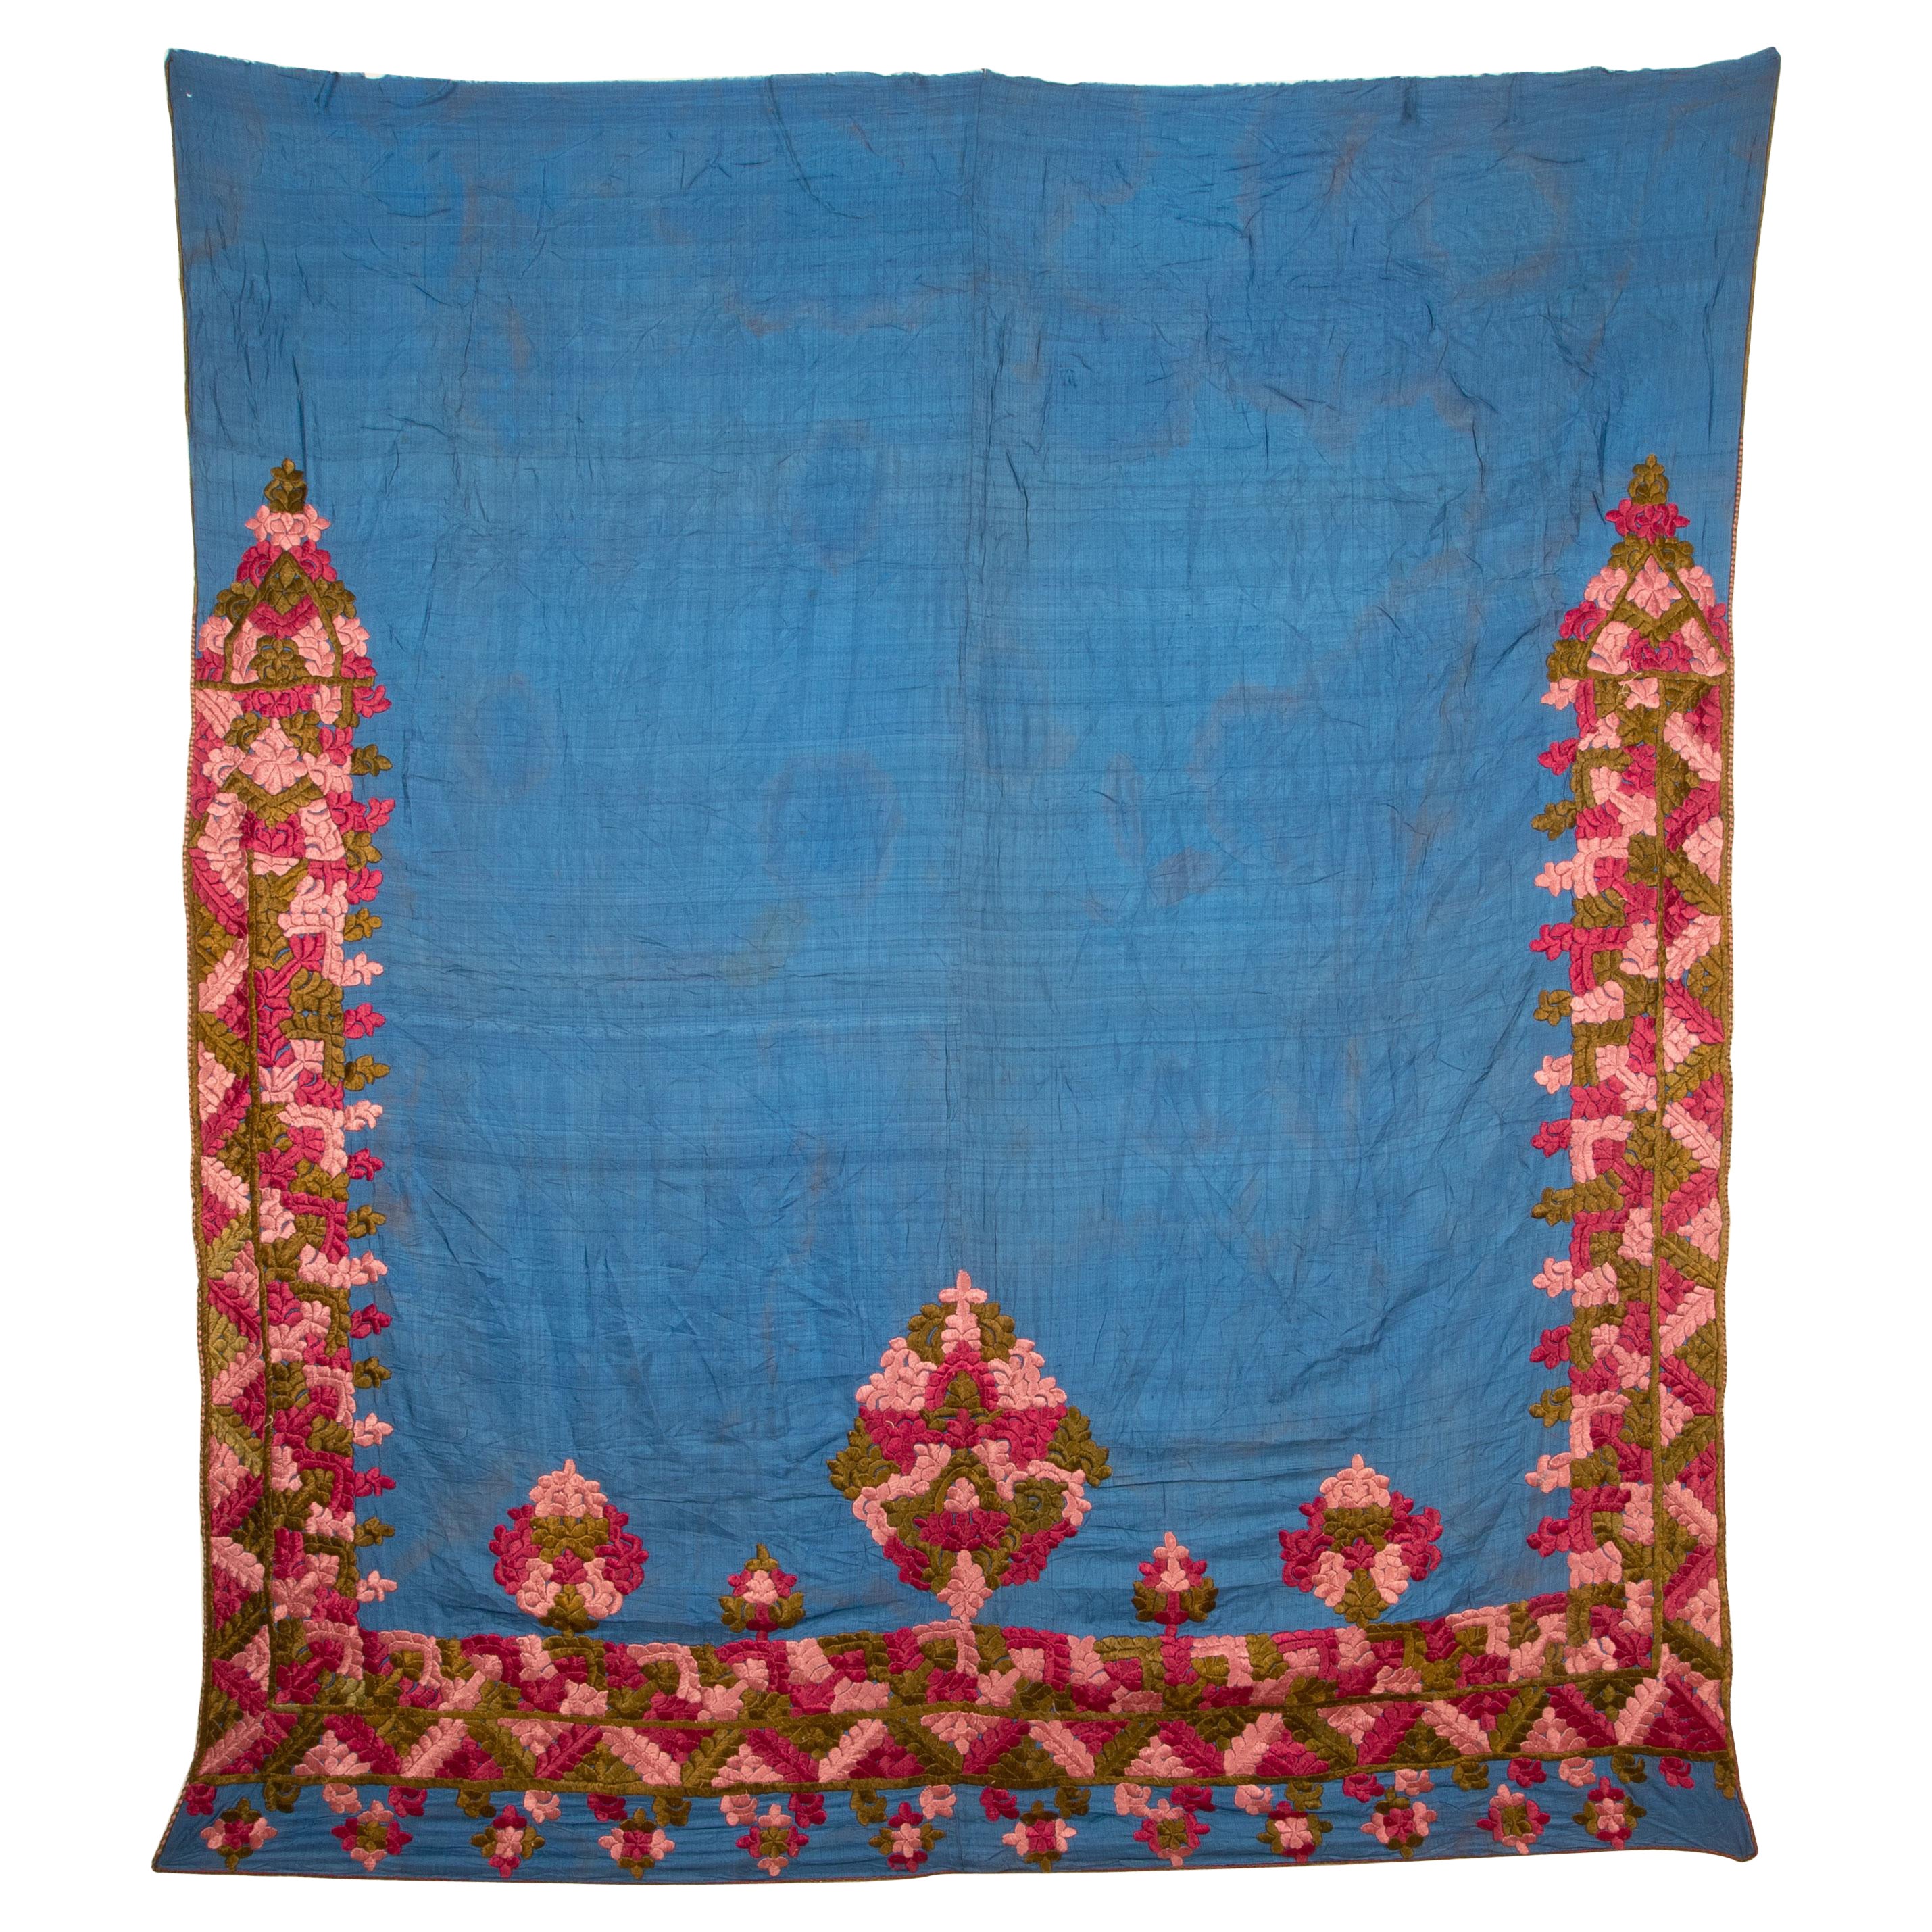 Rabat Curtain 'Izar' from Morocco, Late 19th/ Early 20th C